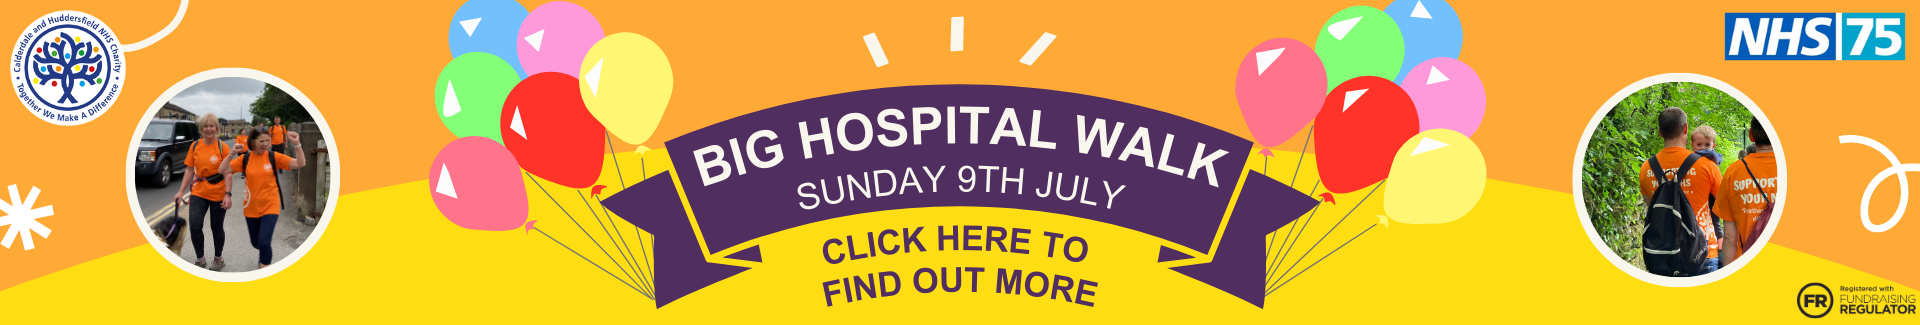 Join in our Big Hospital Walk on Sunday 9th July to help celebrate 75 years of the NHS